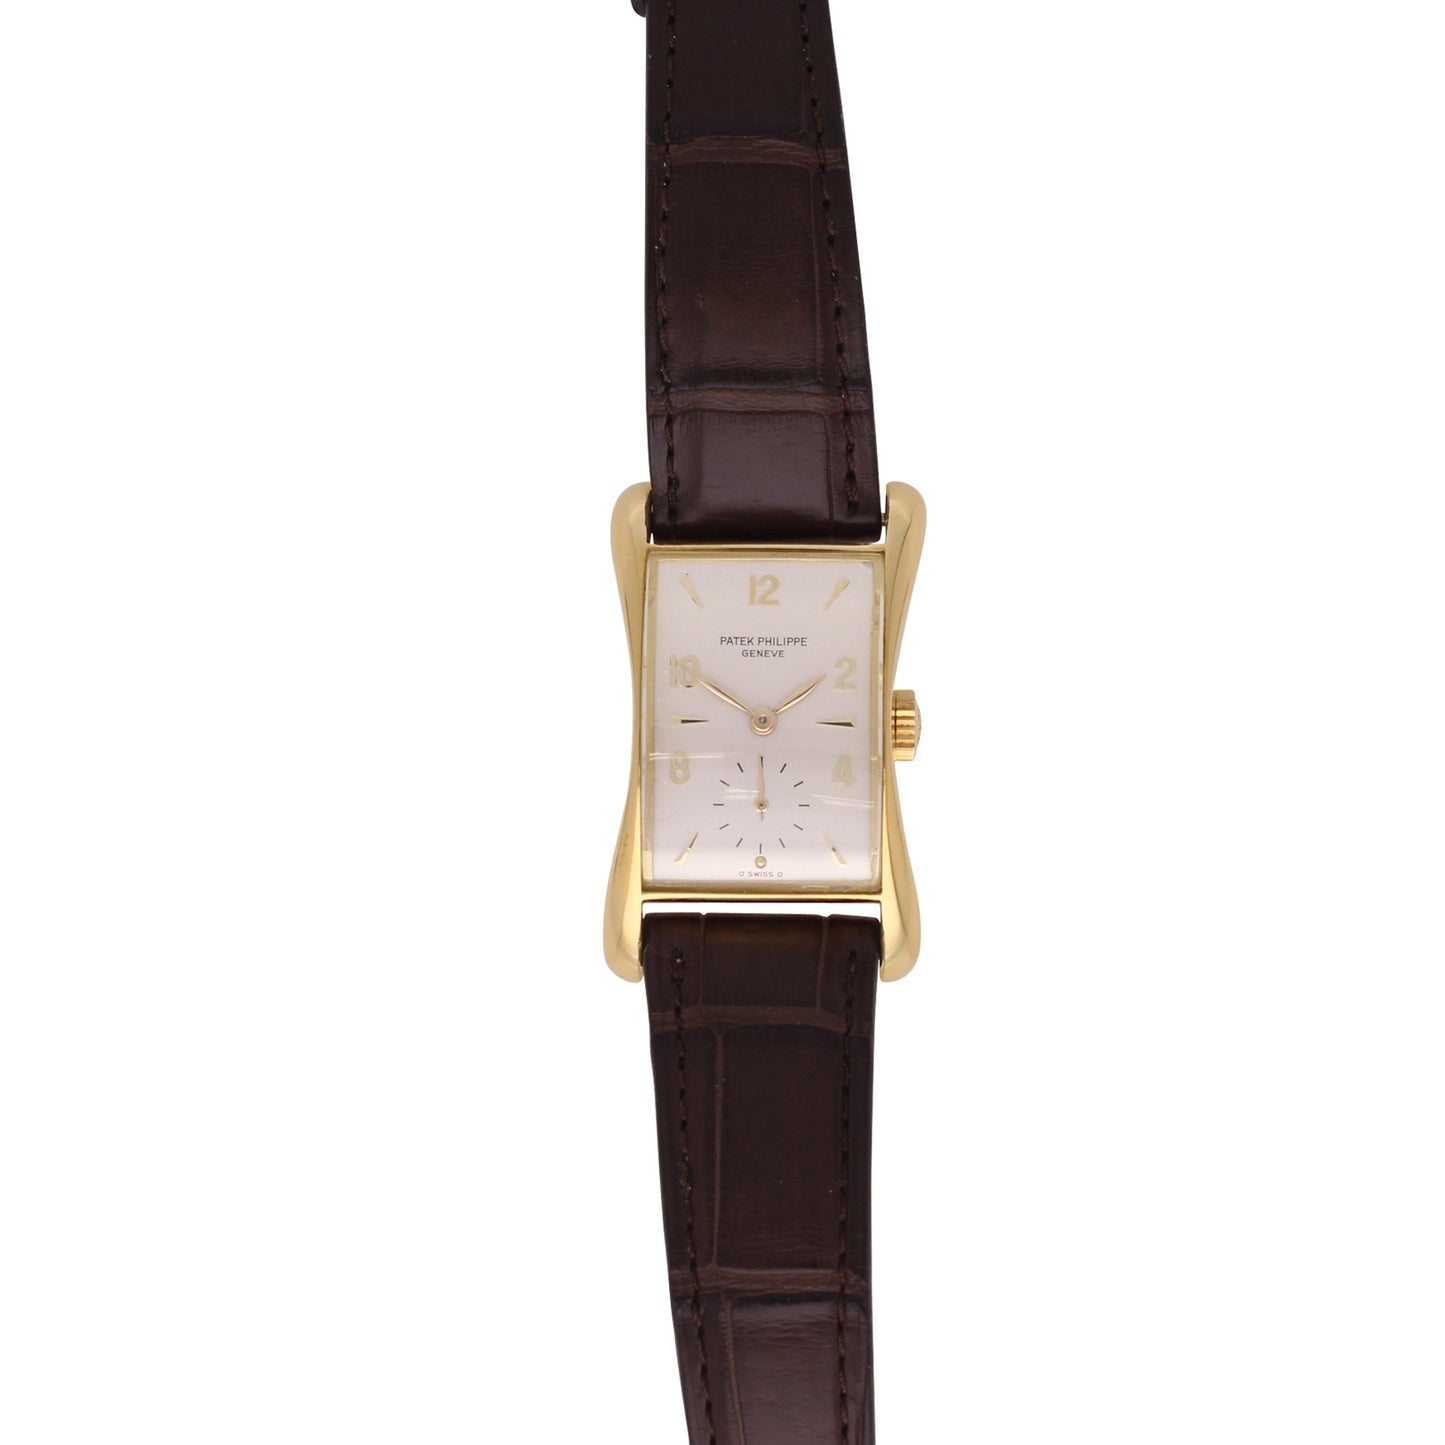 18ct yellow gold Patek Philippe, reference 2442 "Marilyn Monroe" wristwatch. Made 1953